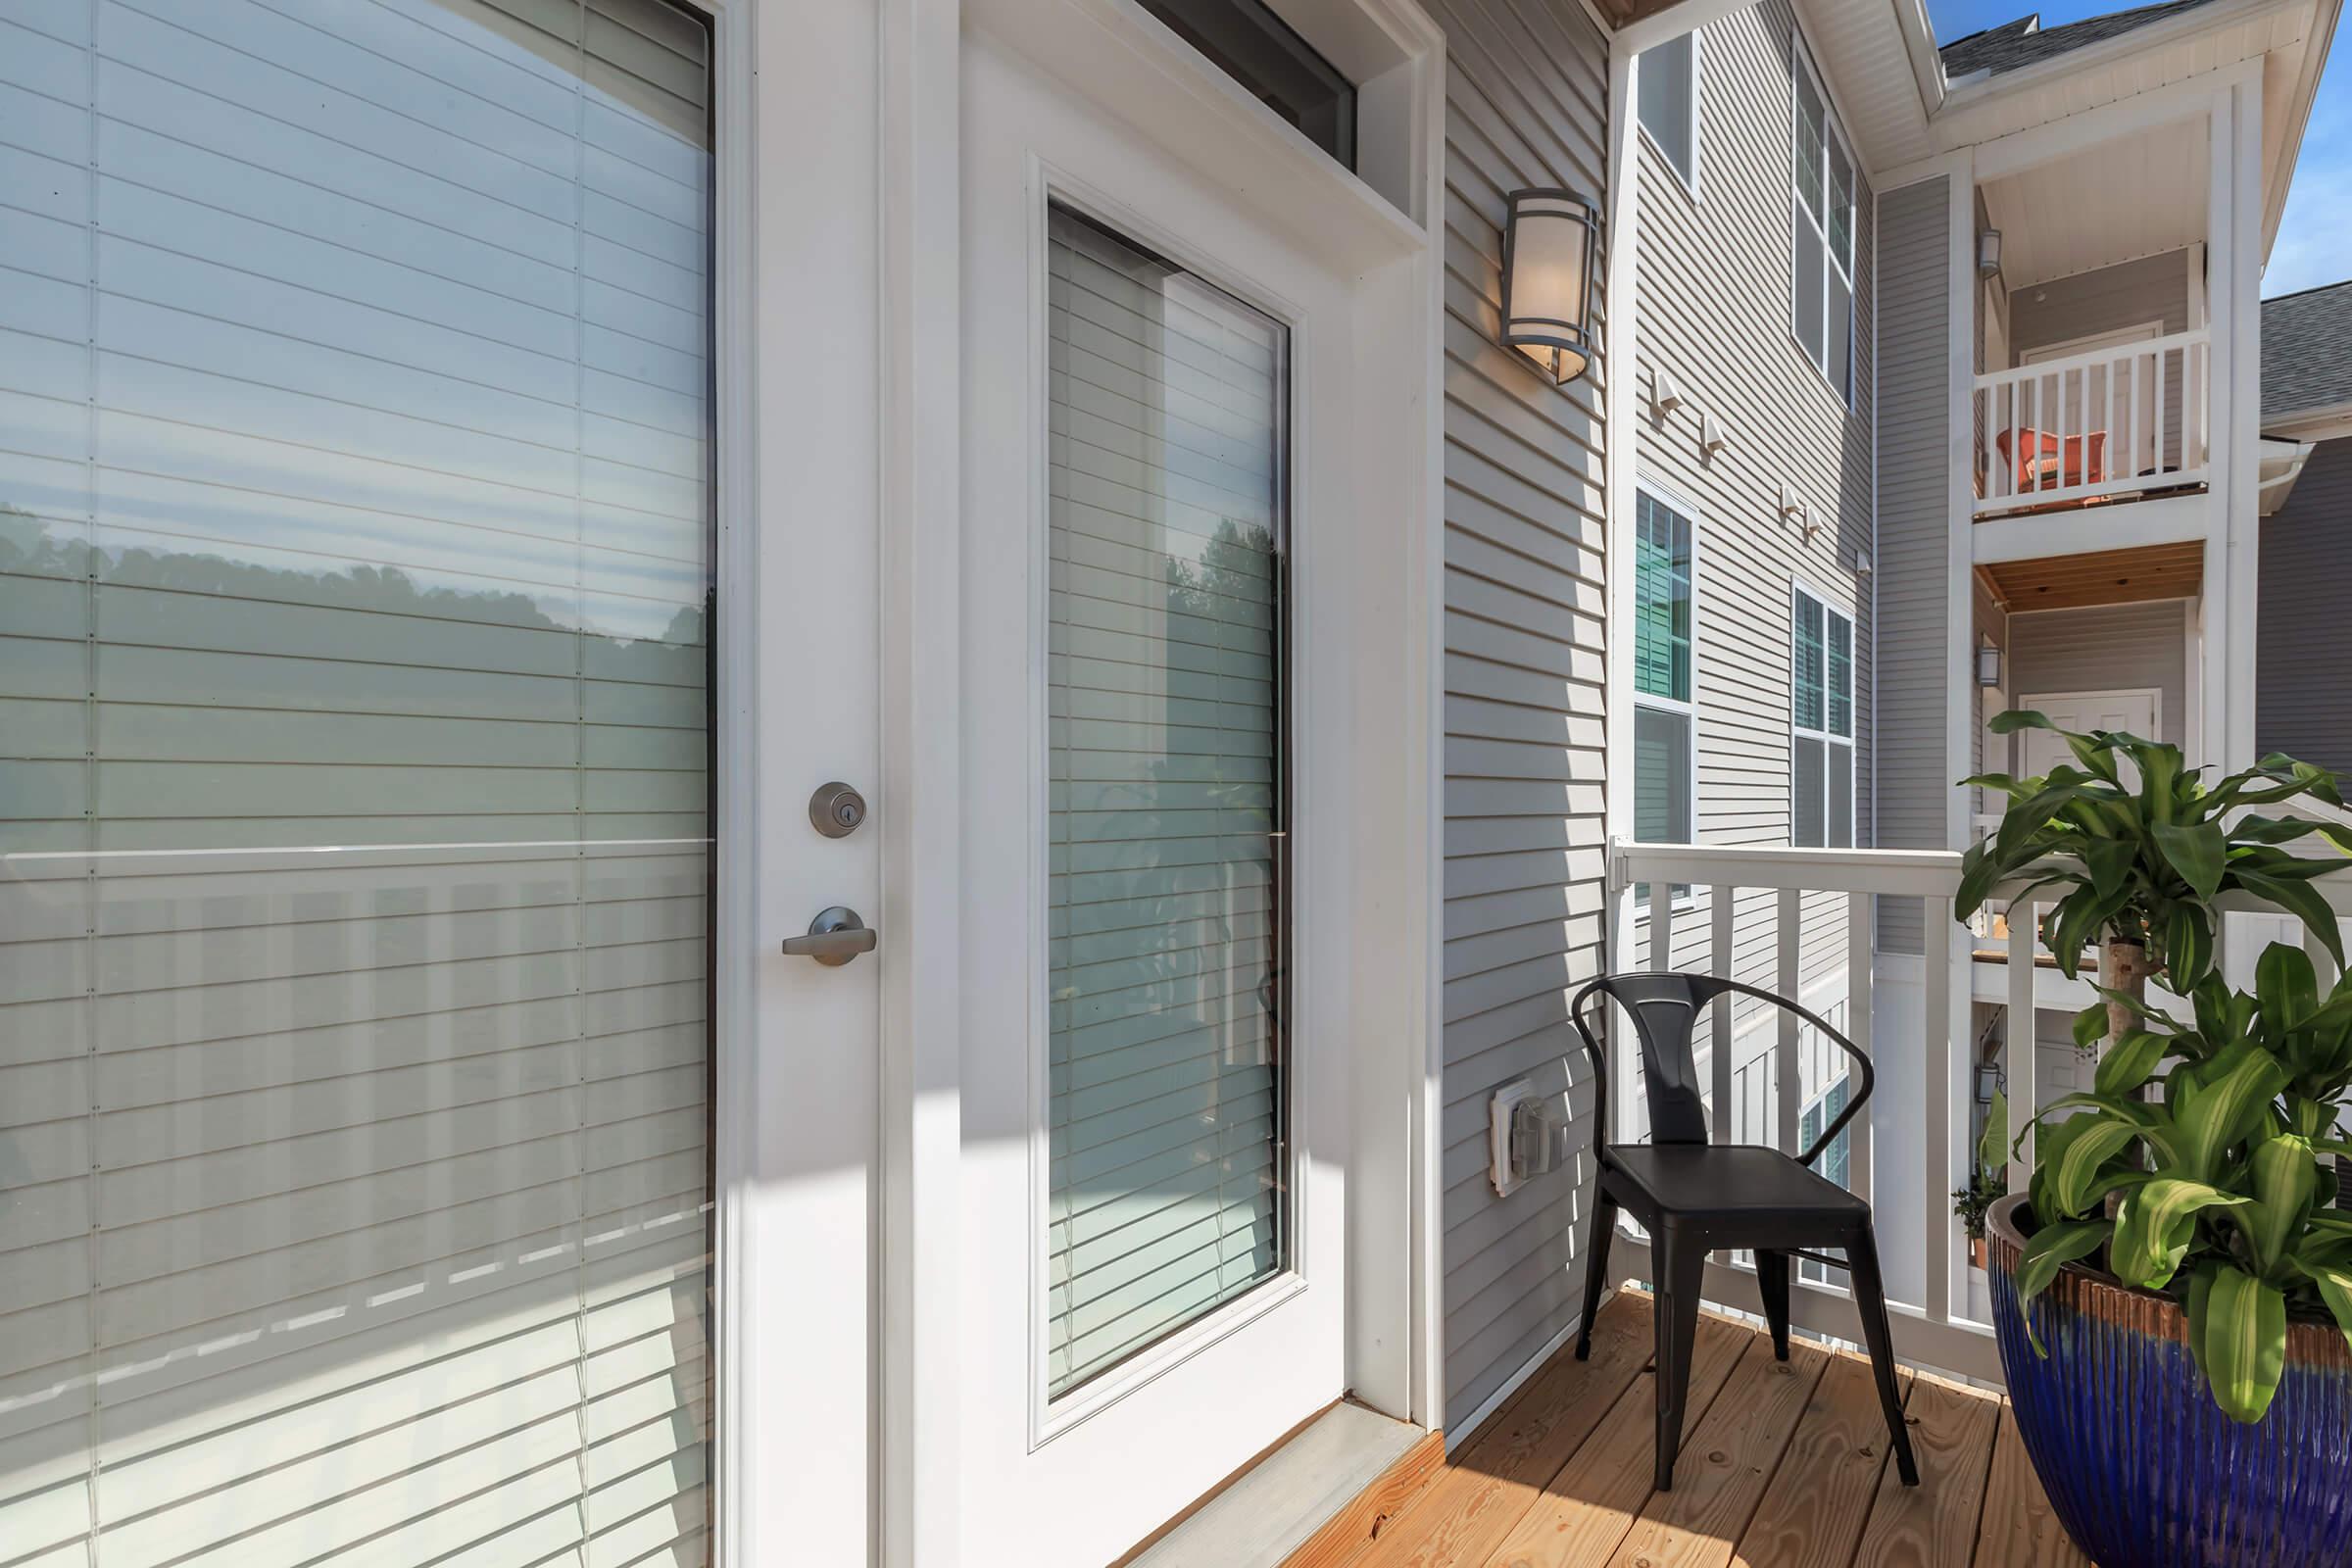 Soak up the Sun At  Riverstone Apartments At Long Shoals In Arden, NC